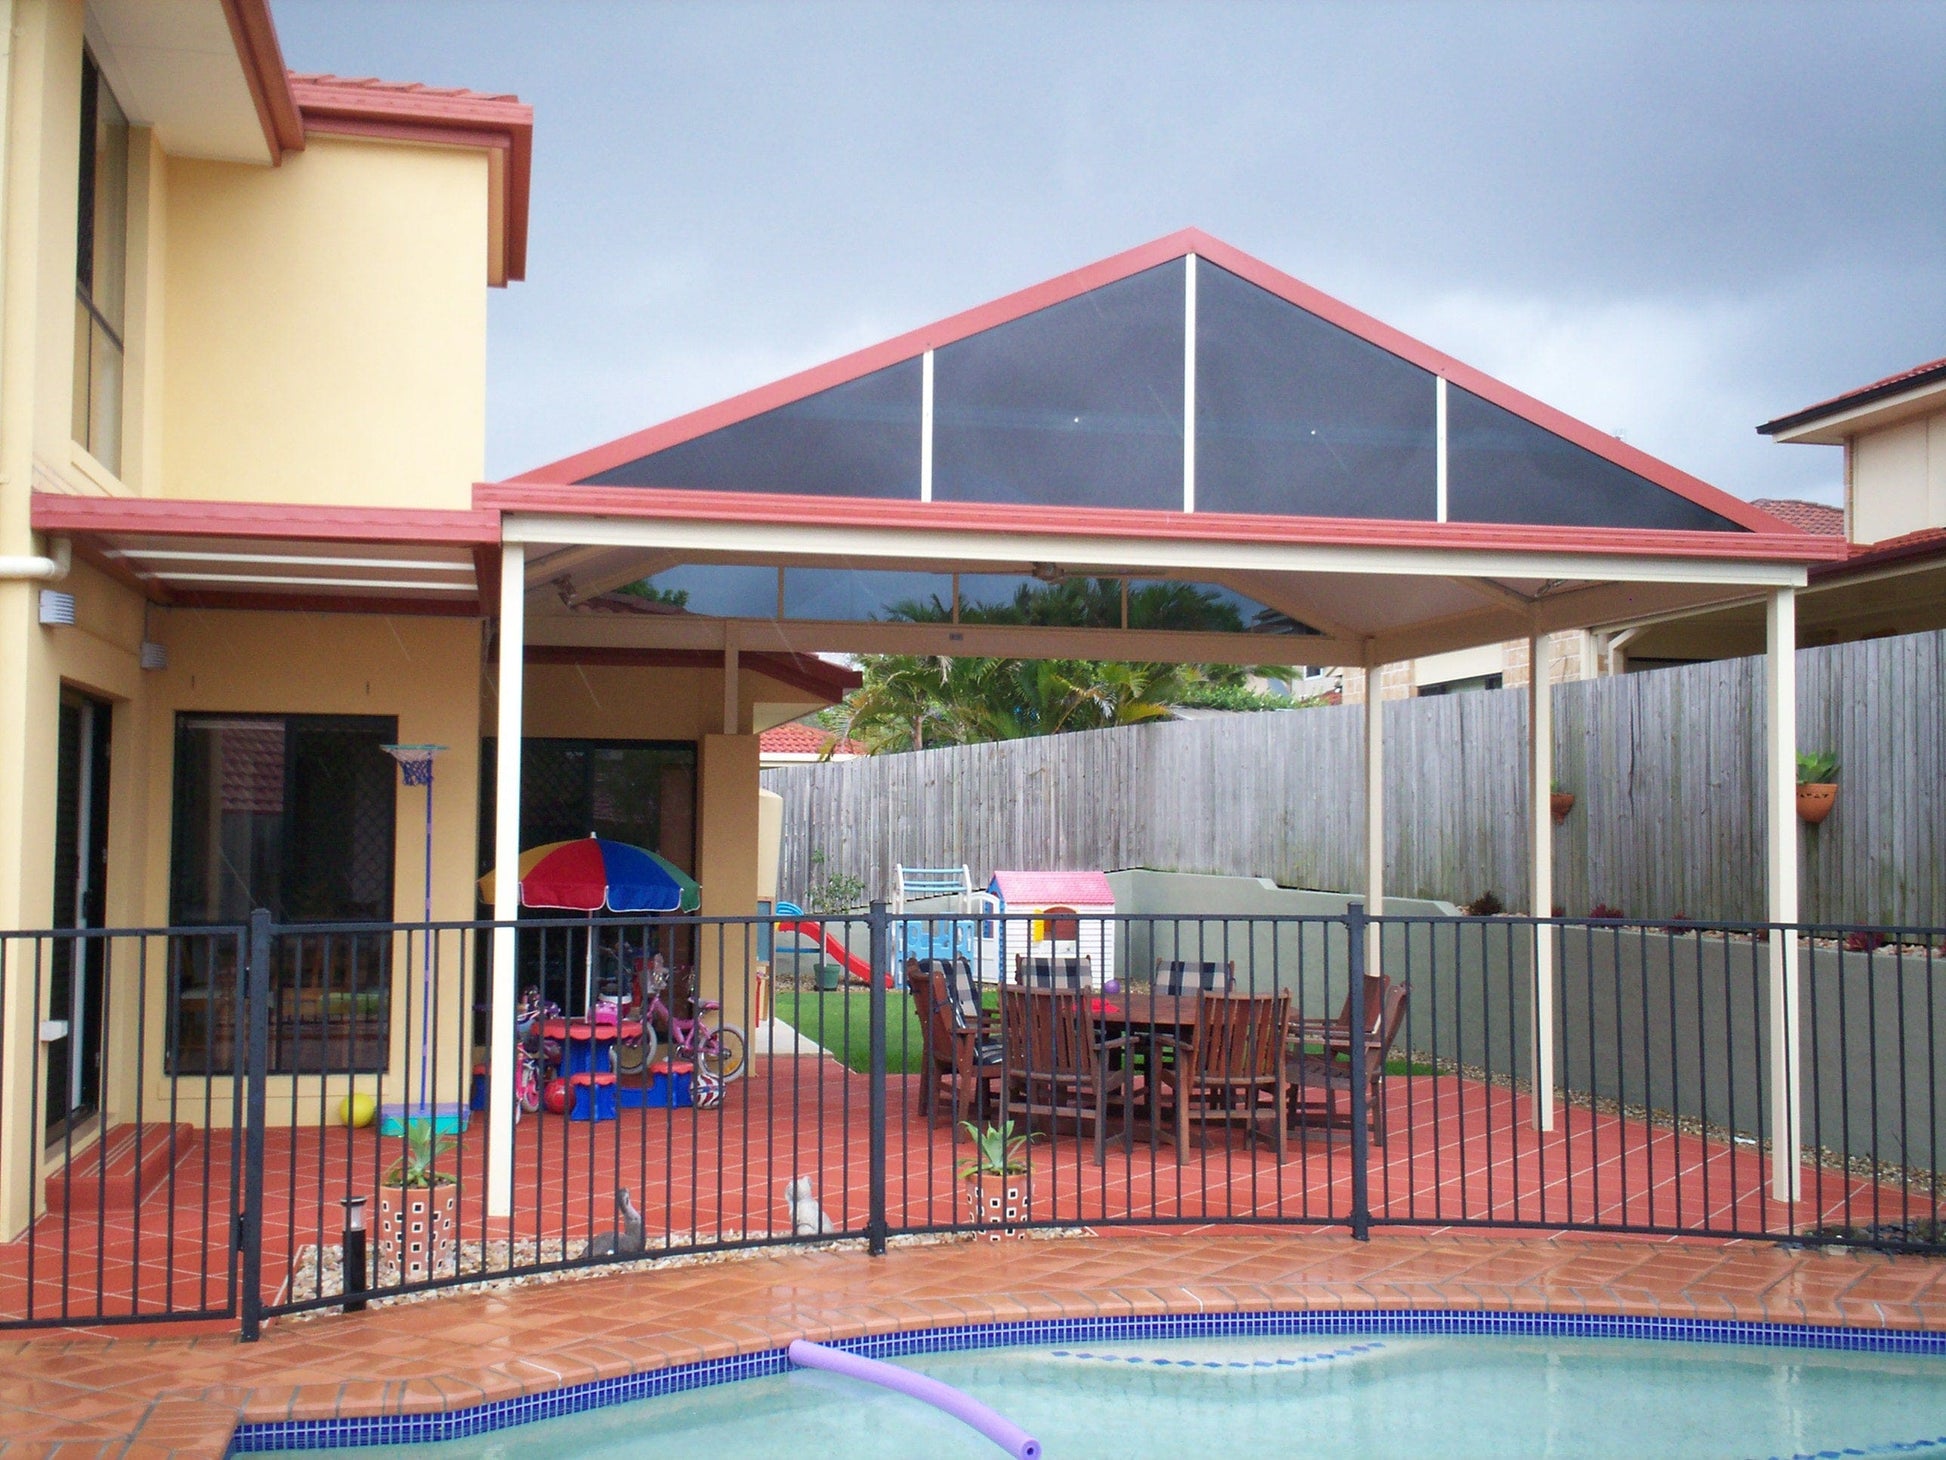 Non-Insulated Gable Patio - 7m x 5m- Supply & Install QHI National